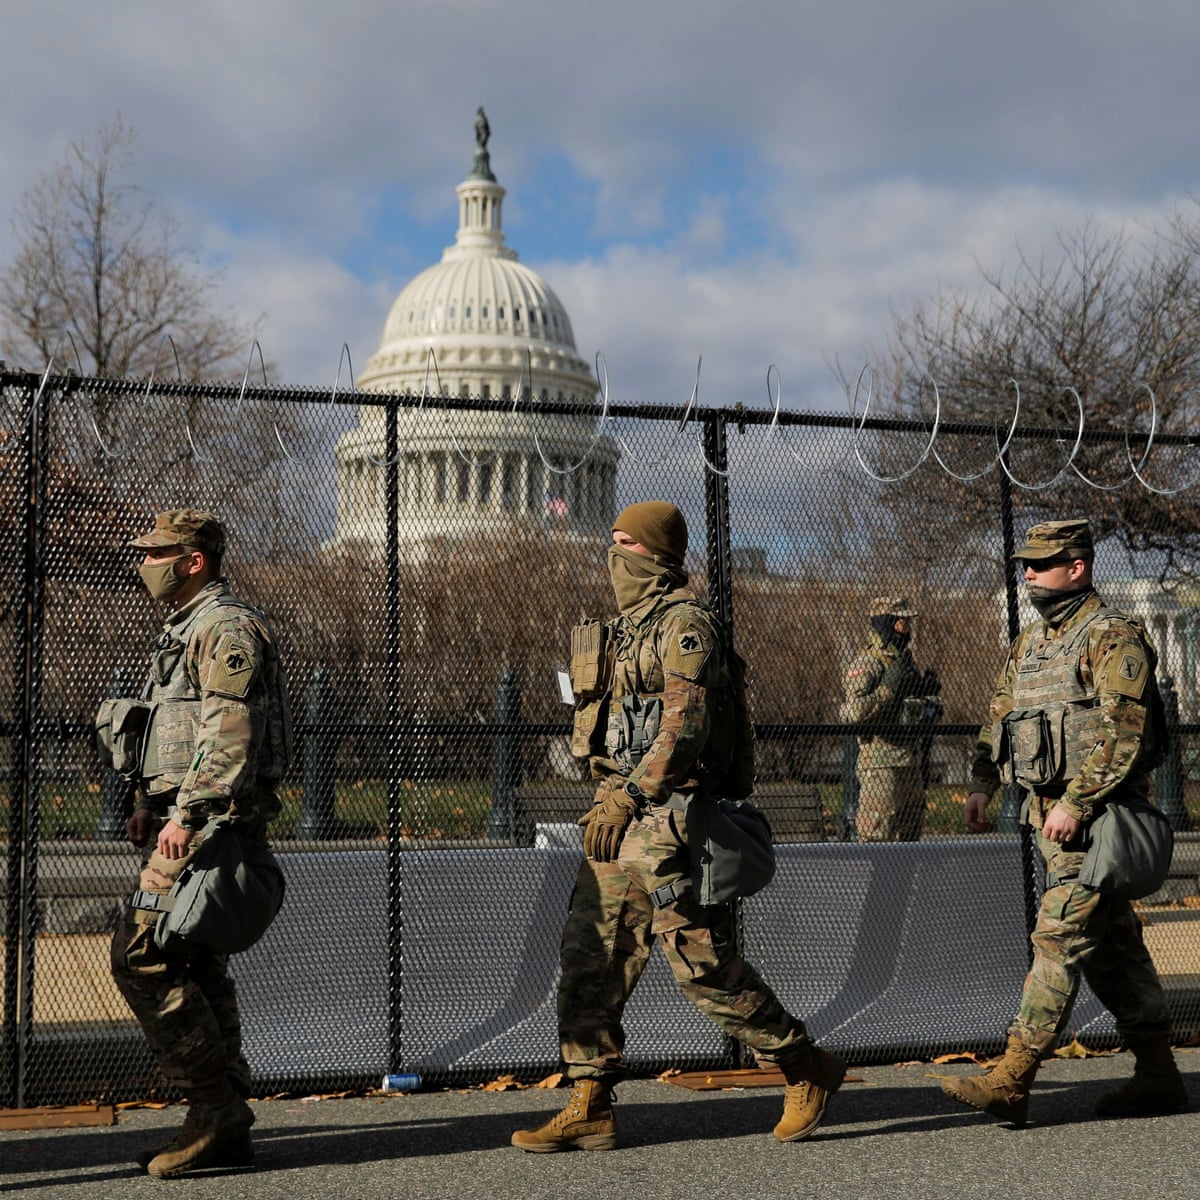 This is not freedom': militarized US Capitol a sign of forever wars coming home | US Capitol breach | The Guardian